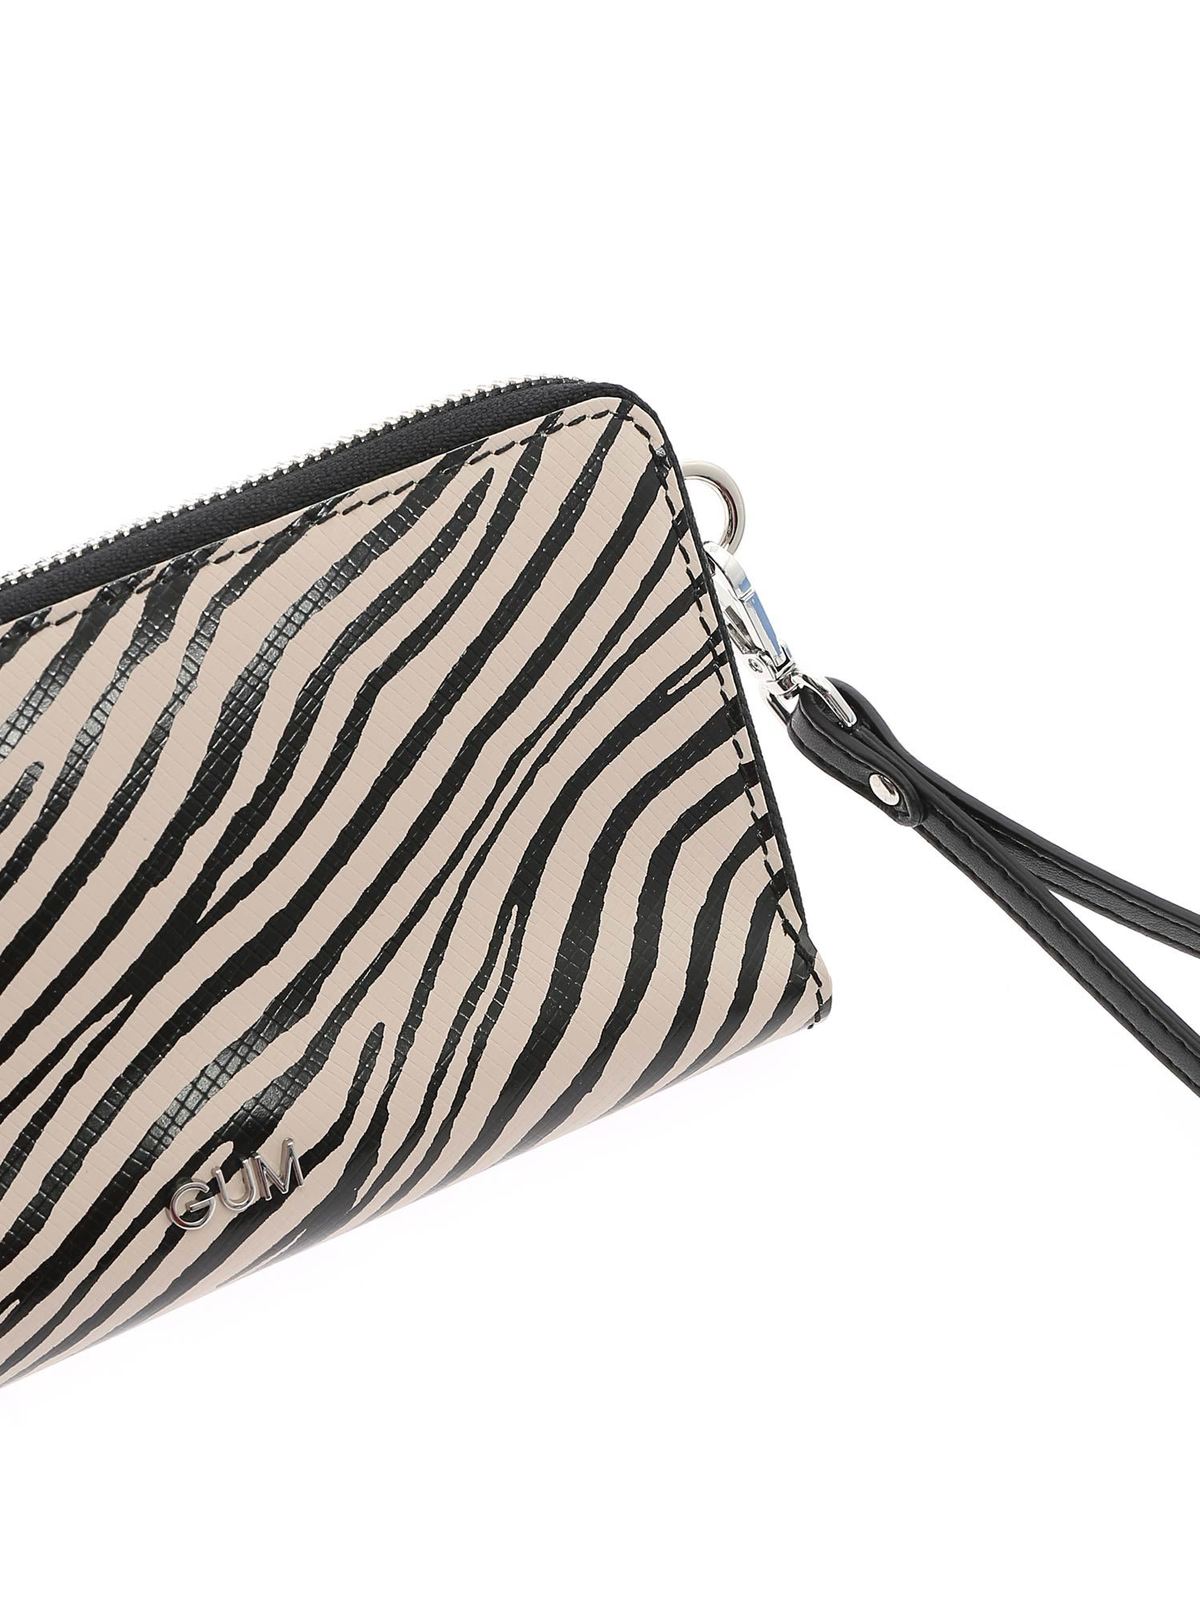 Buy Off White Handbags for Women by Anekaant Online | Ajio.com